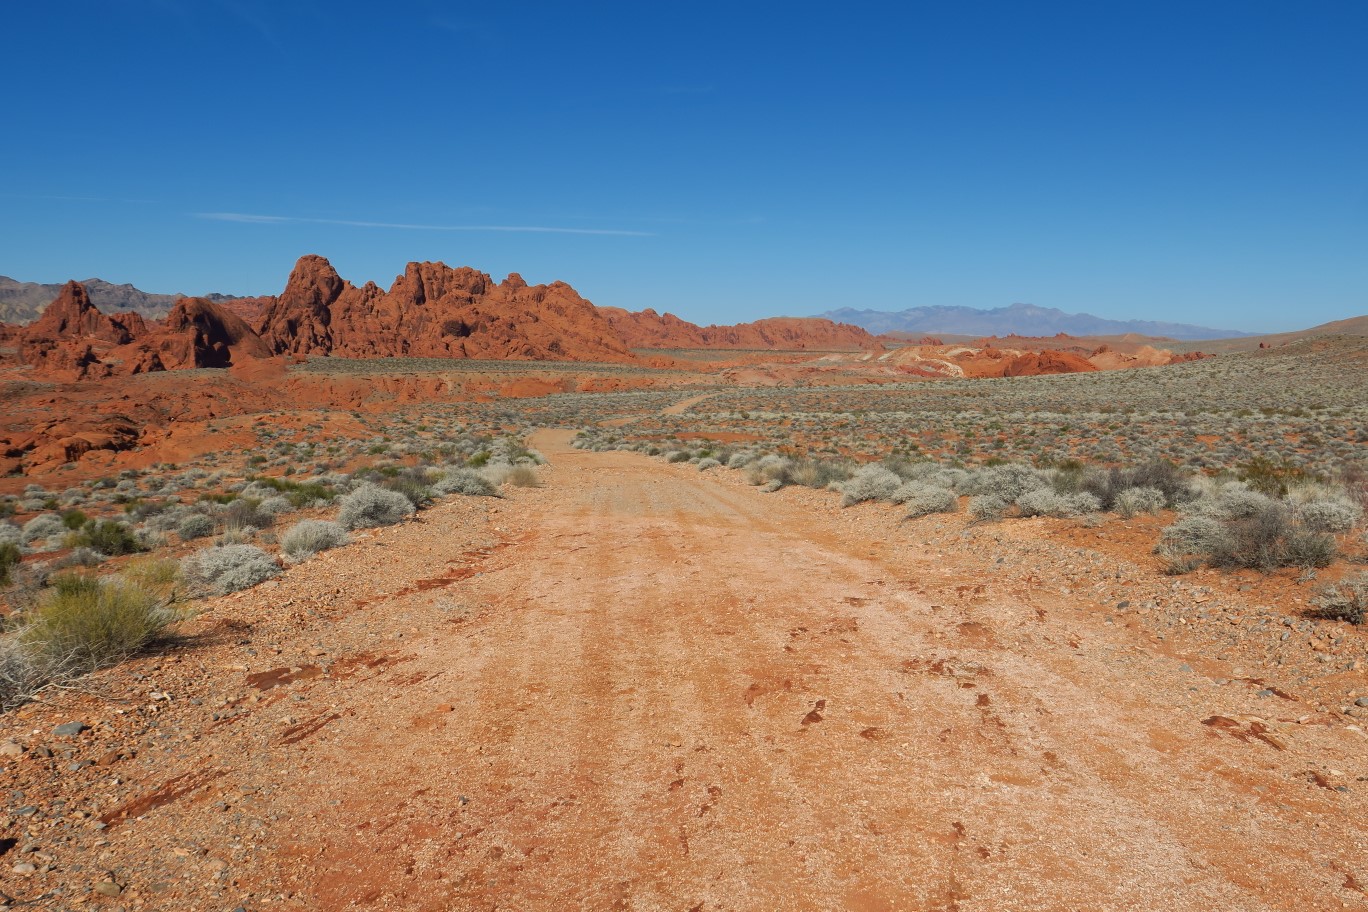 02-easy_hike_down_a_dirt_road_that_has_no_issues_so_wondering_why_closed